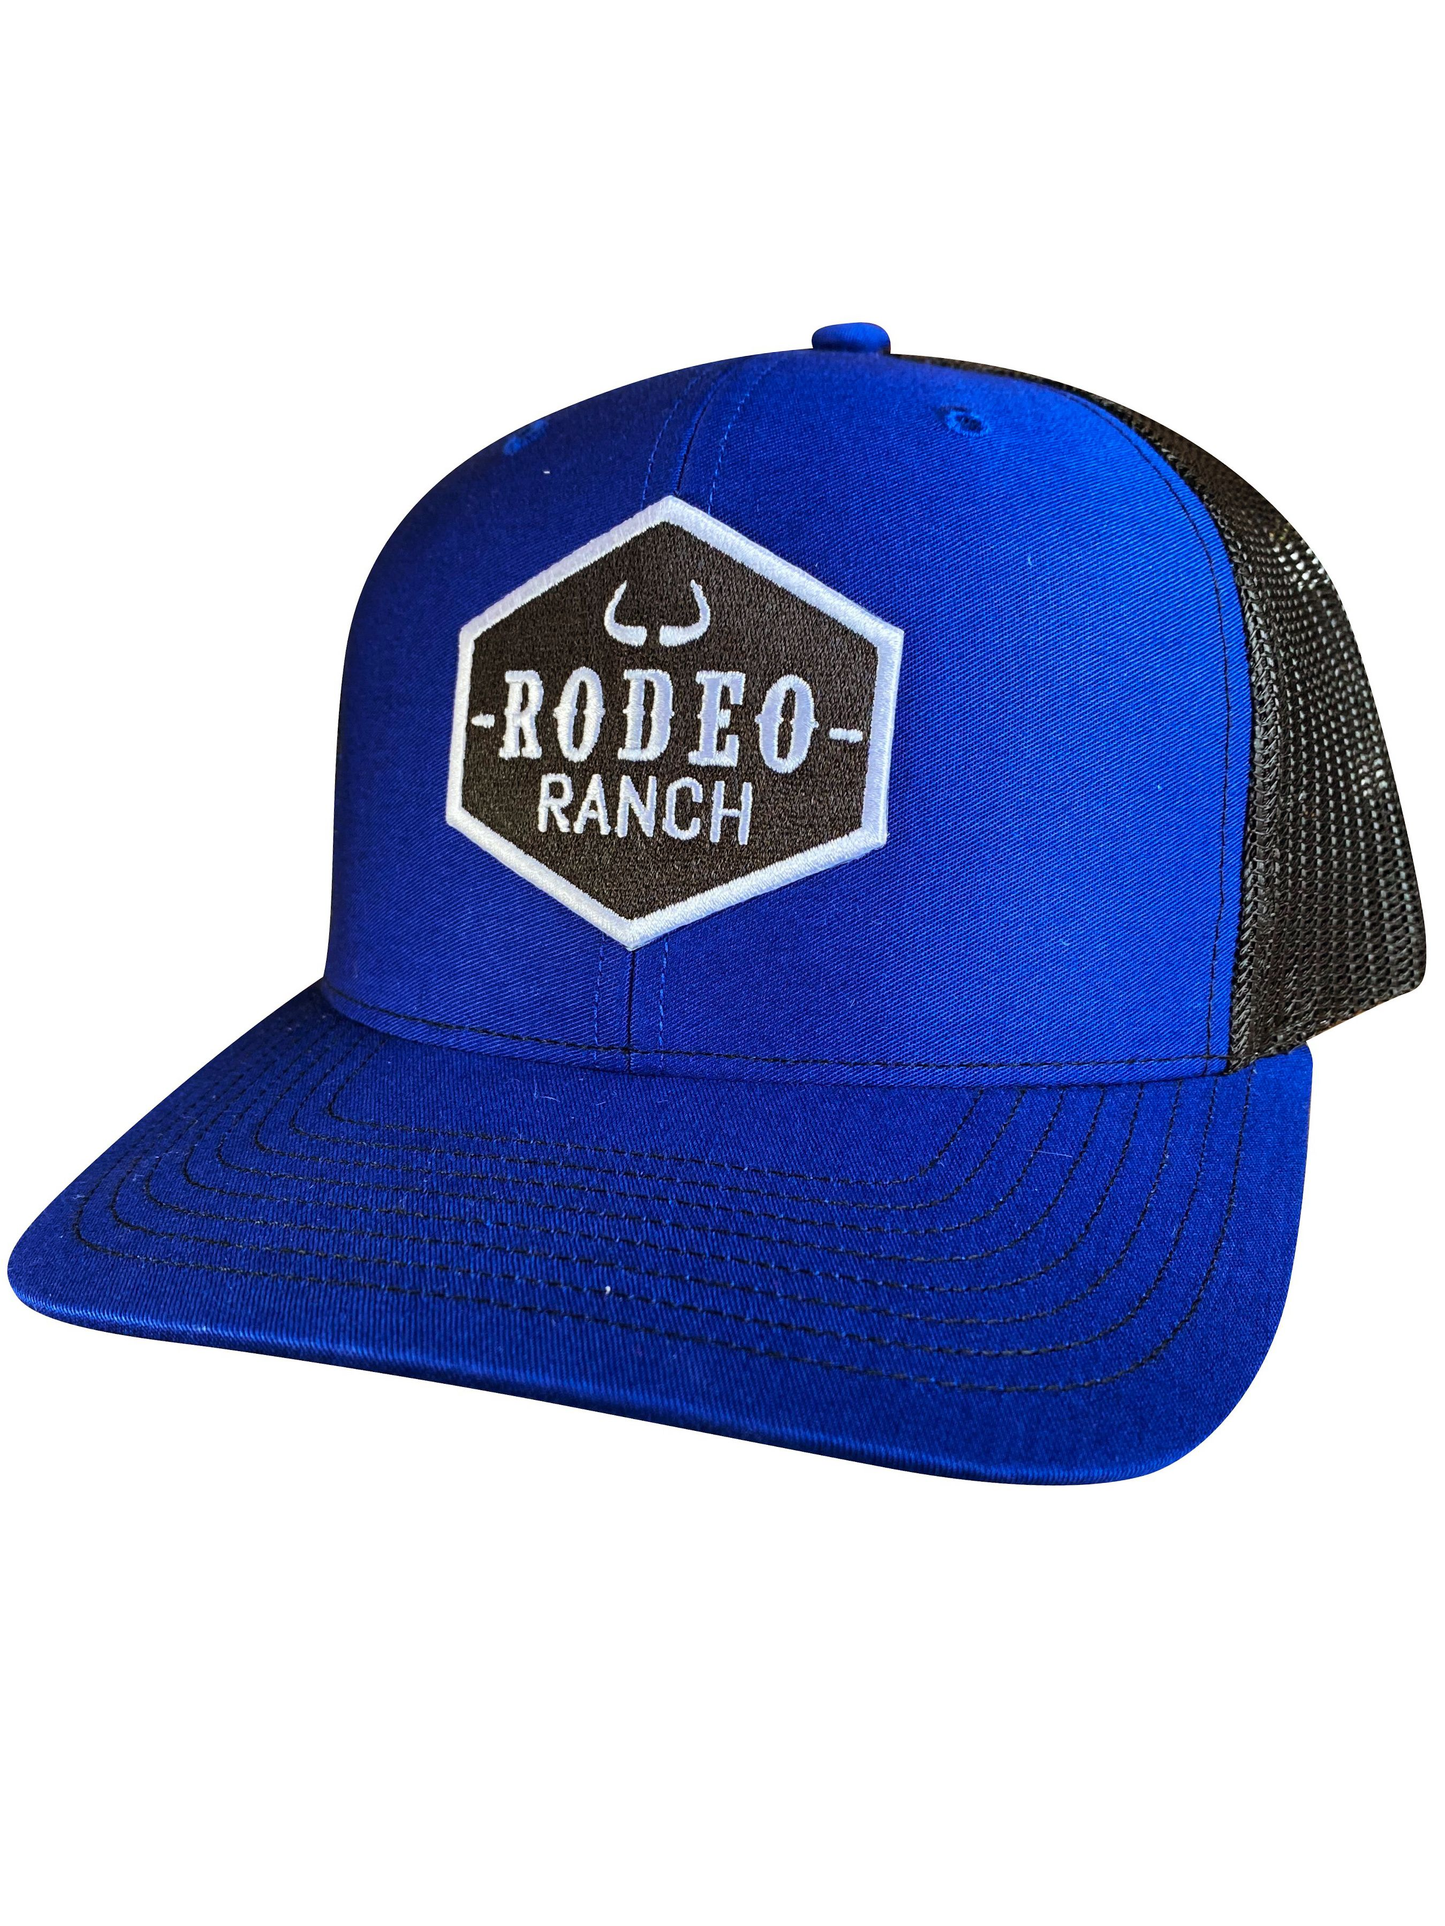 Rodeo Ranch Classic Logo Hat - Royal Blue and Black